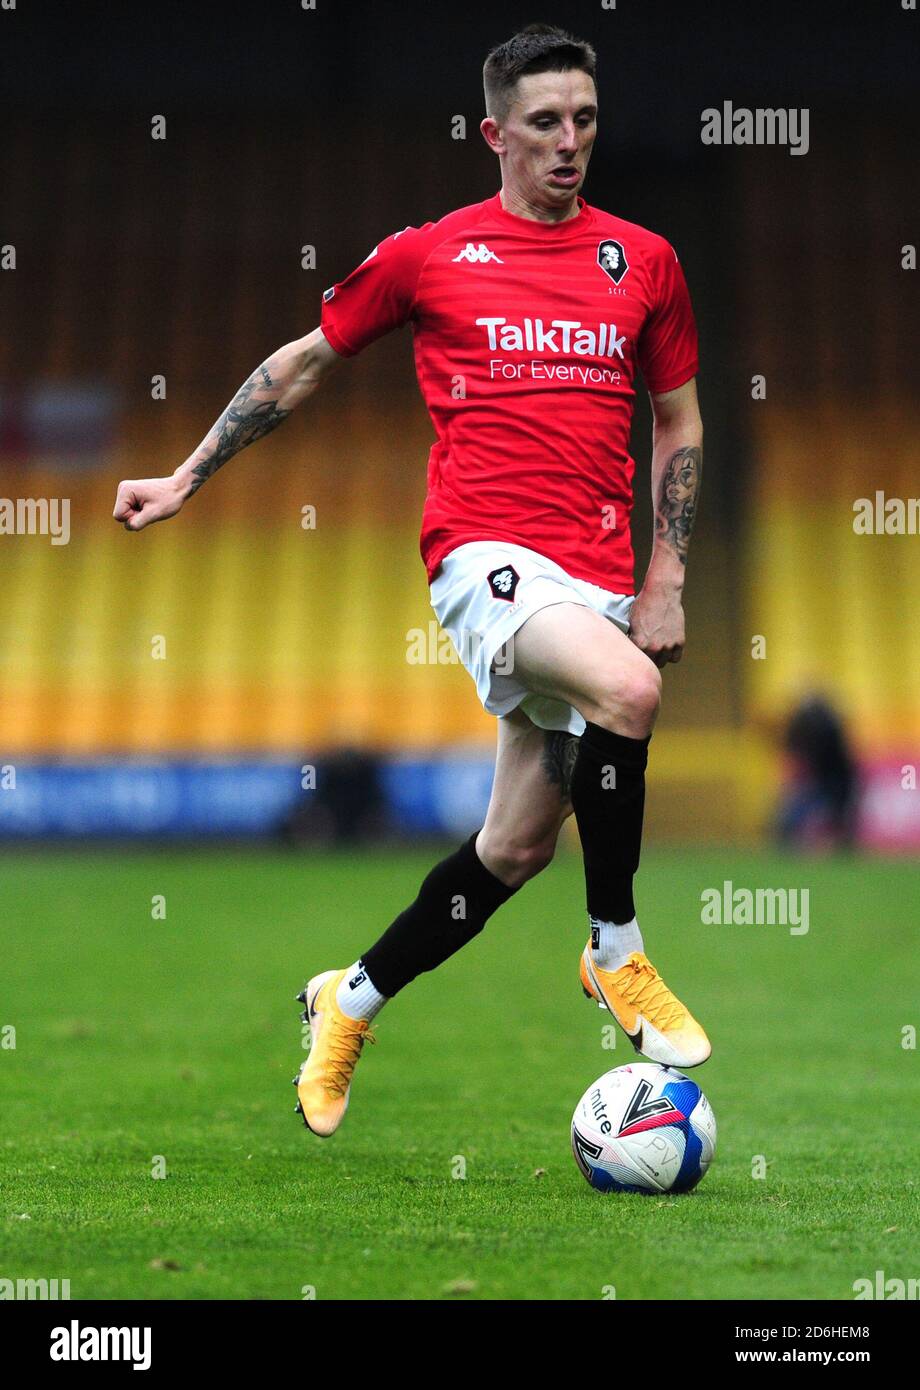 Salford???s Ashley Hunter during the Sky Bet League Two match at Vale Park, Stoke-on-Trent. Stock Photo